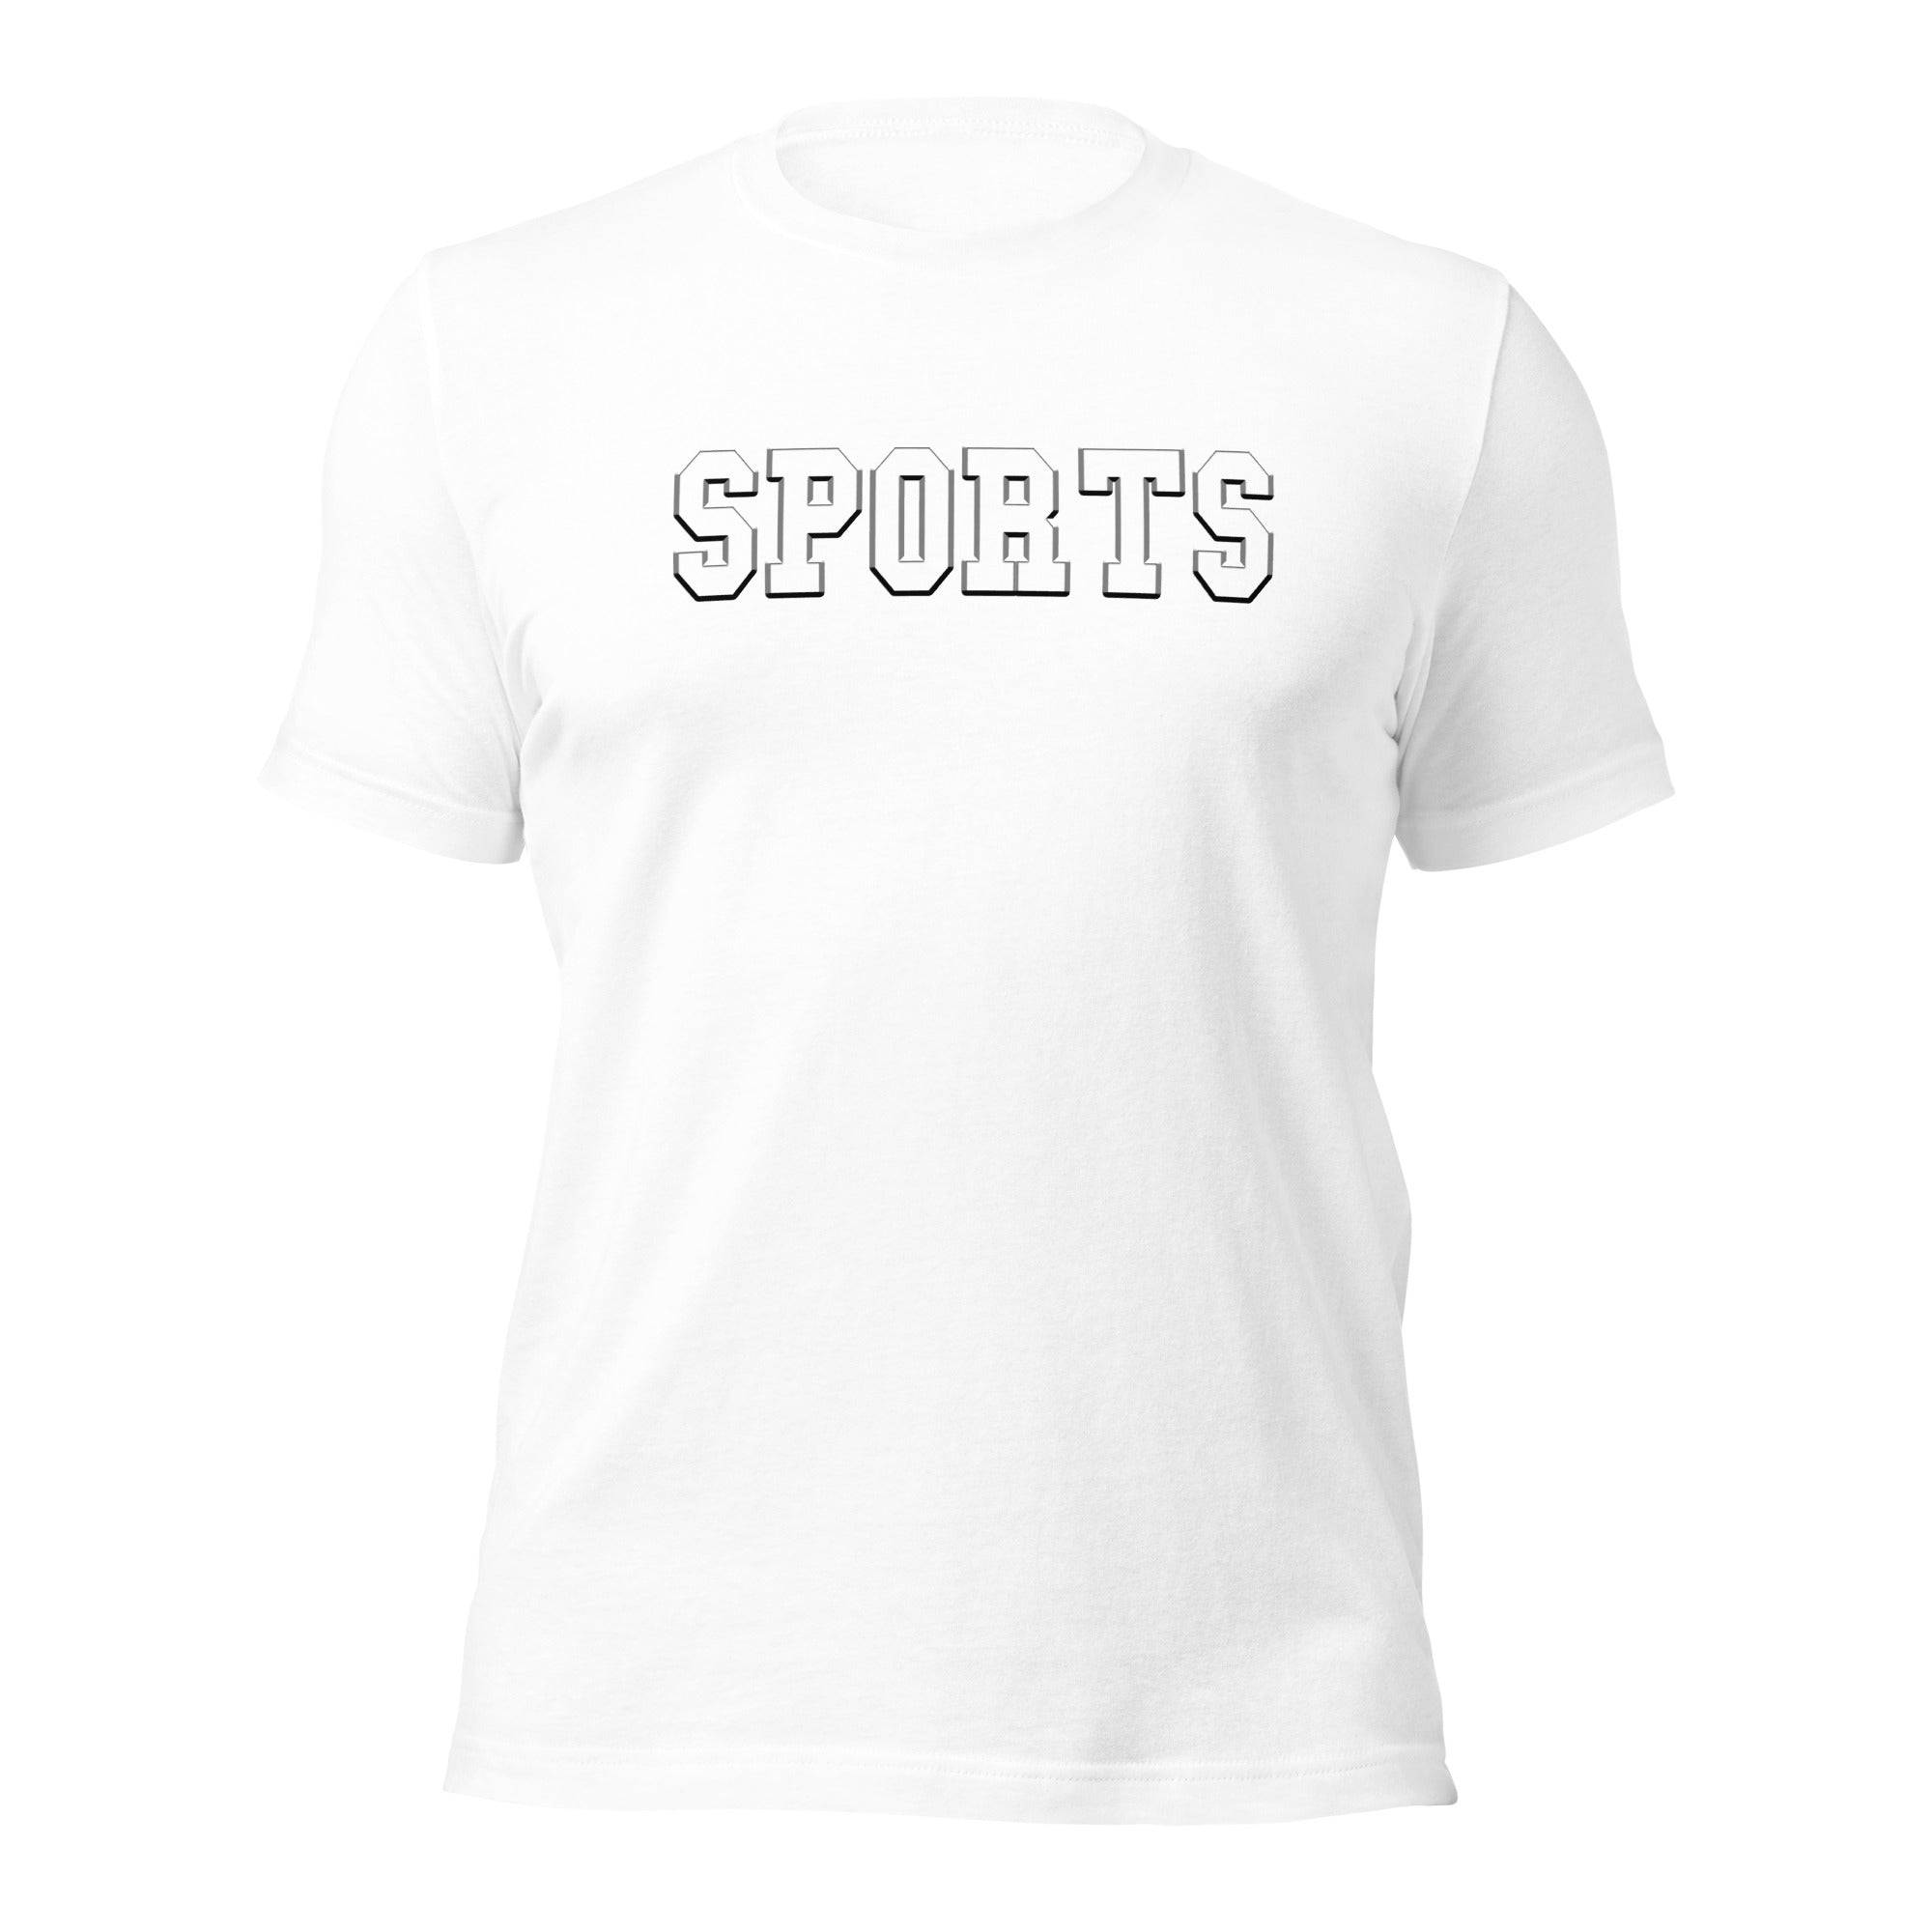 a red t - shirt with the word sports on it